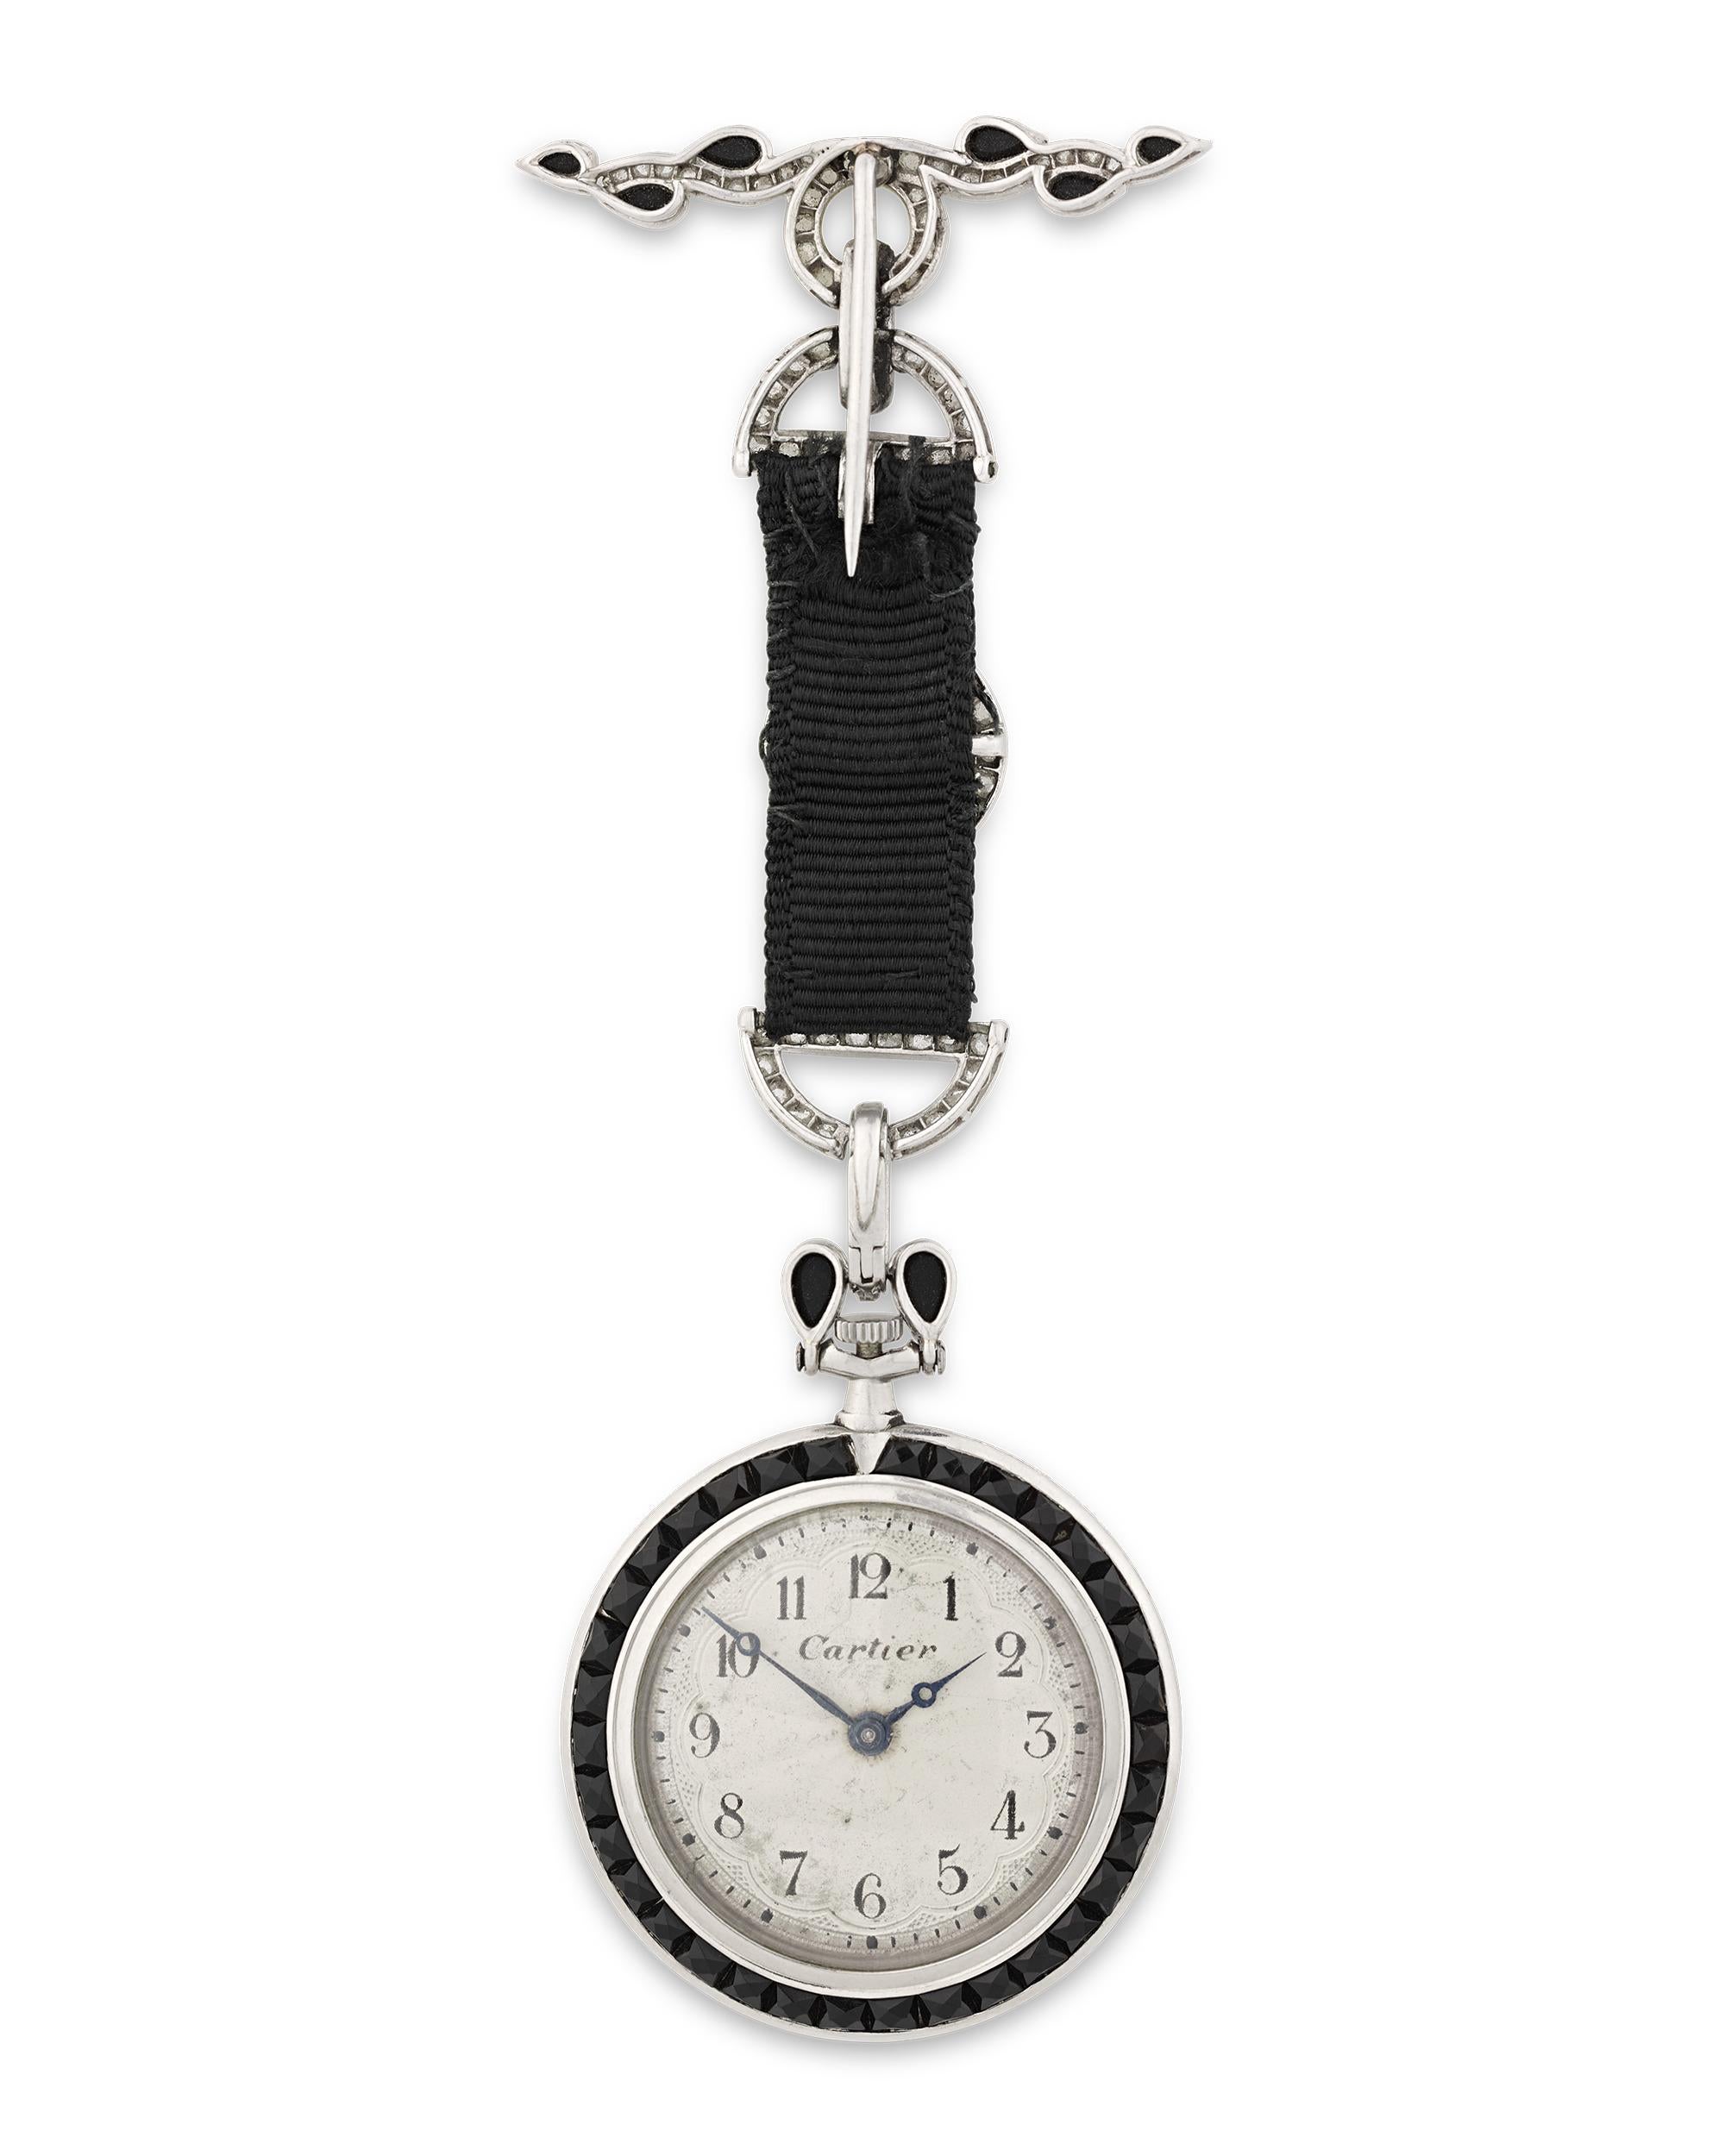 A study in bold design, this elegant pendant watch by Cartier is in a class of its own. Crafted of platinum with a jet bezel, the timepiece features pierced hands and painted Arabic numerals on the dial. Diamonds totaling approximately 0.50 carat